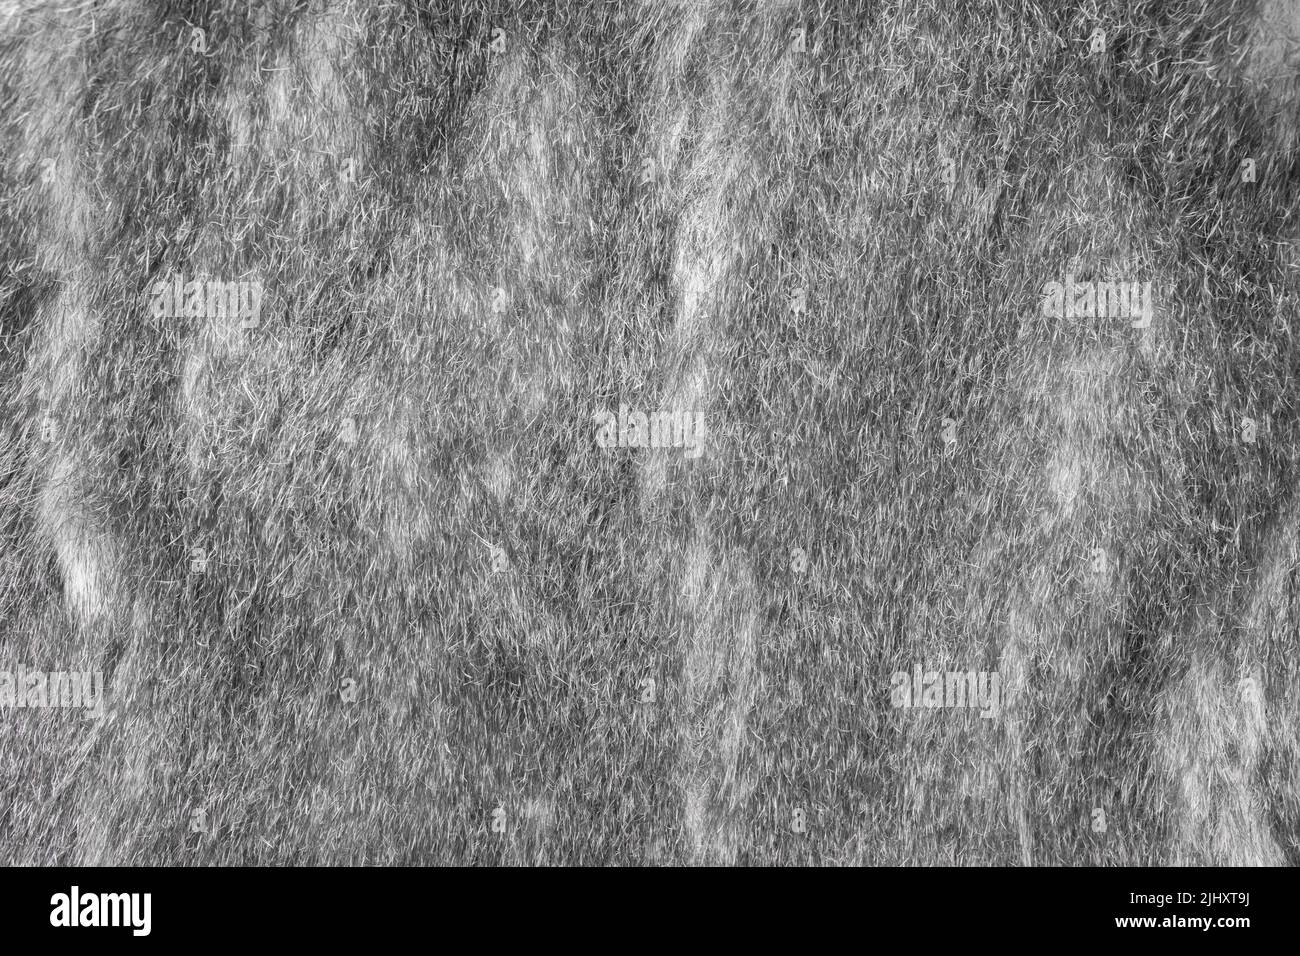 Faux fur grey wool abstract pattern nature skin soft warm fluffy background texture. Stock Photo